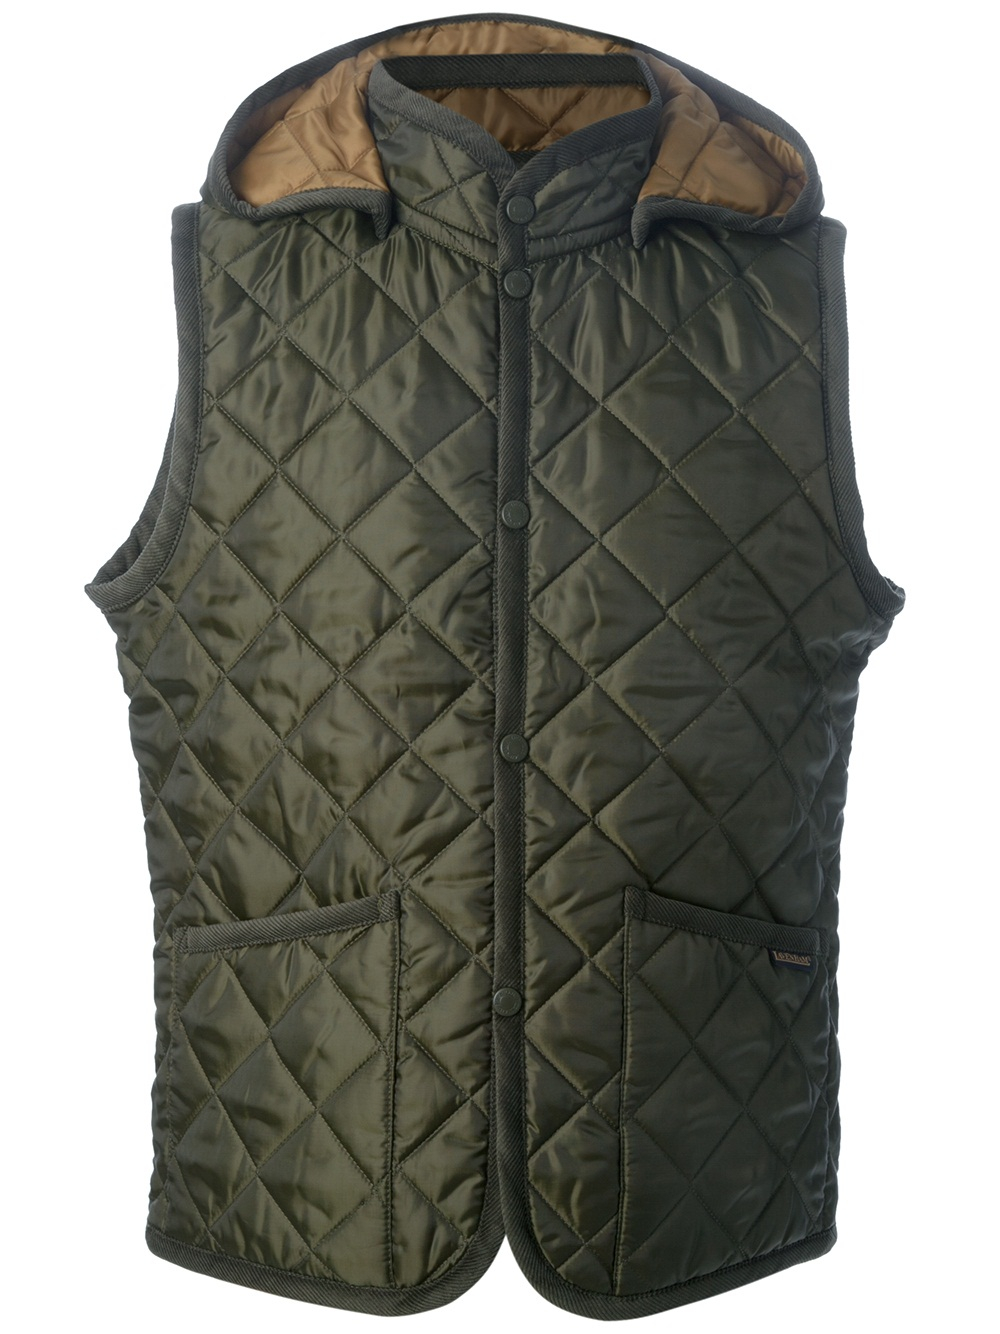 Lyst - Lavenham Quilted Gilet in Green for Men